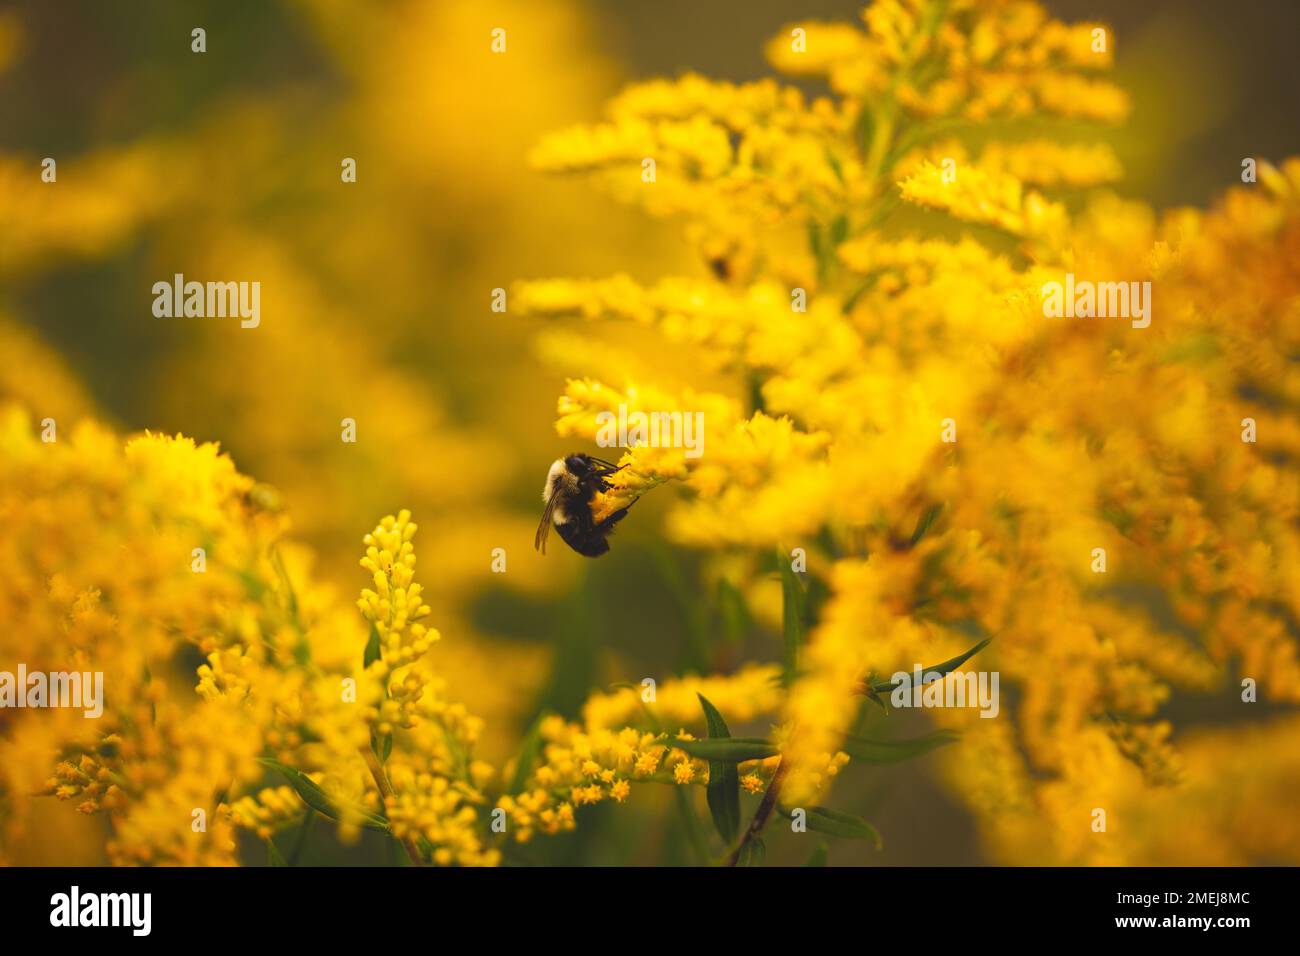 A closeup of Solidago gigantea with Bombus griseocollis, the brown-belted bumblebee. Ontario, Canada. Stock Photo